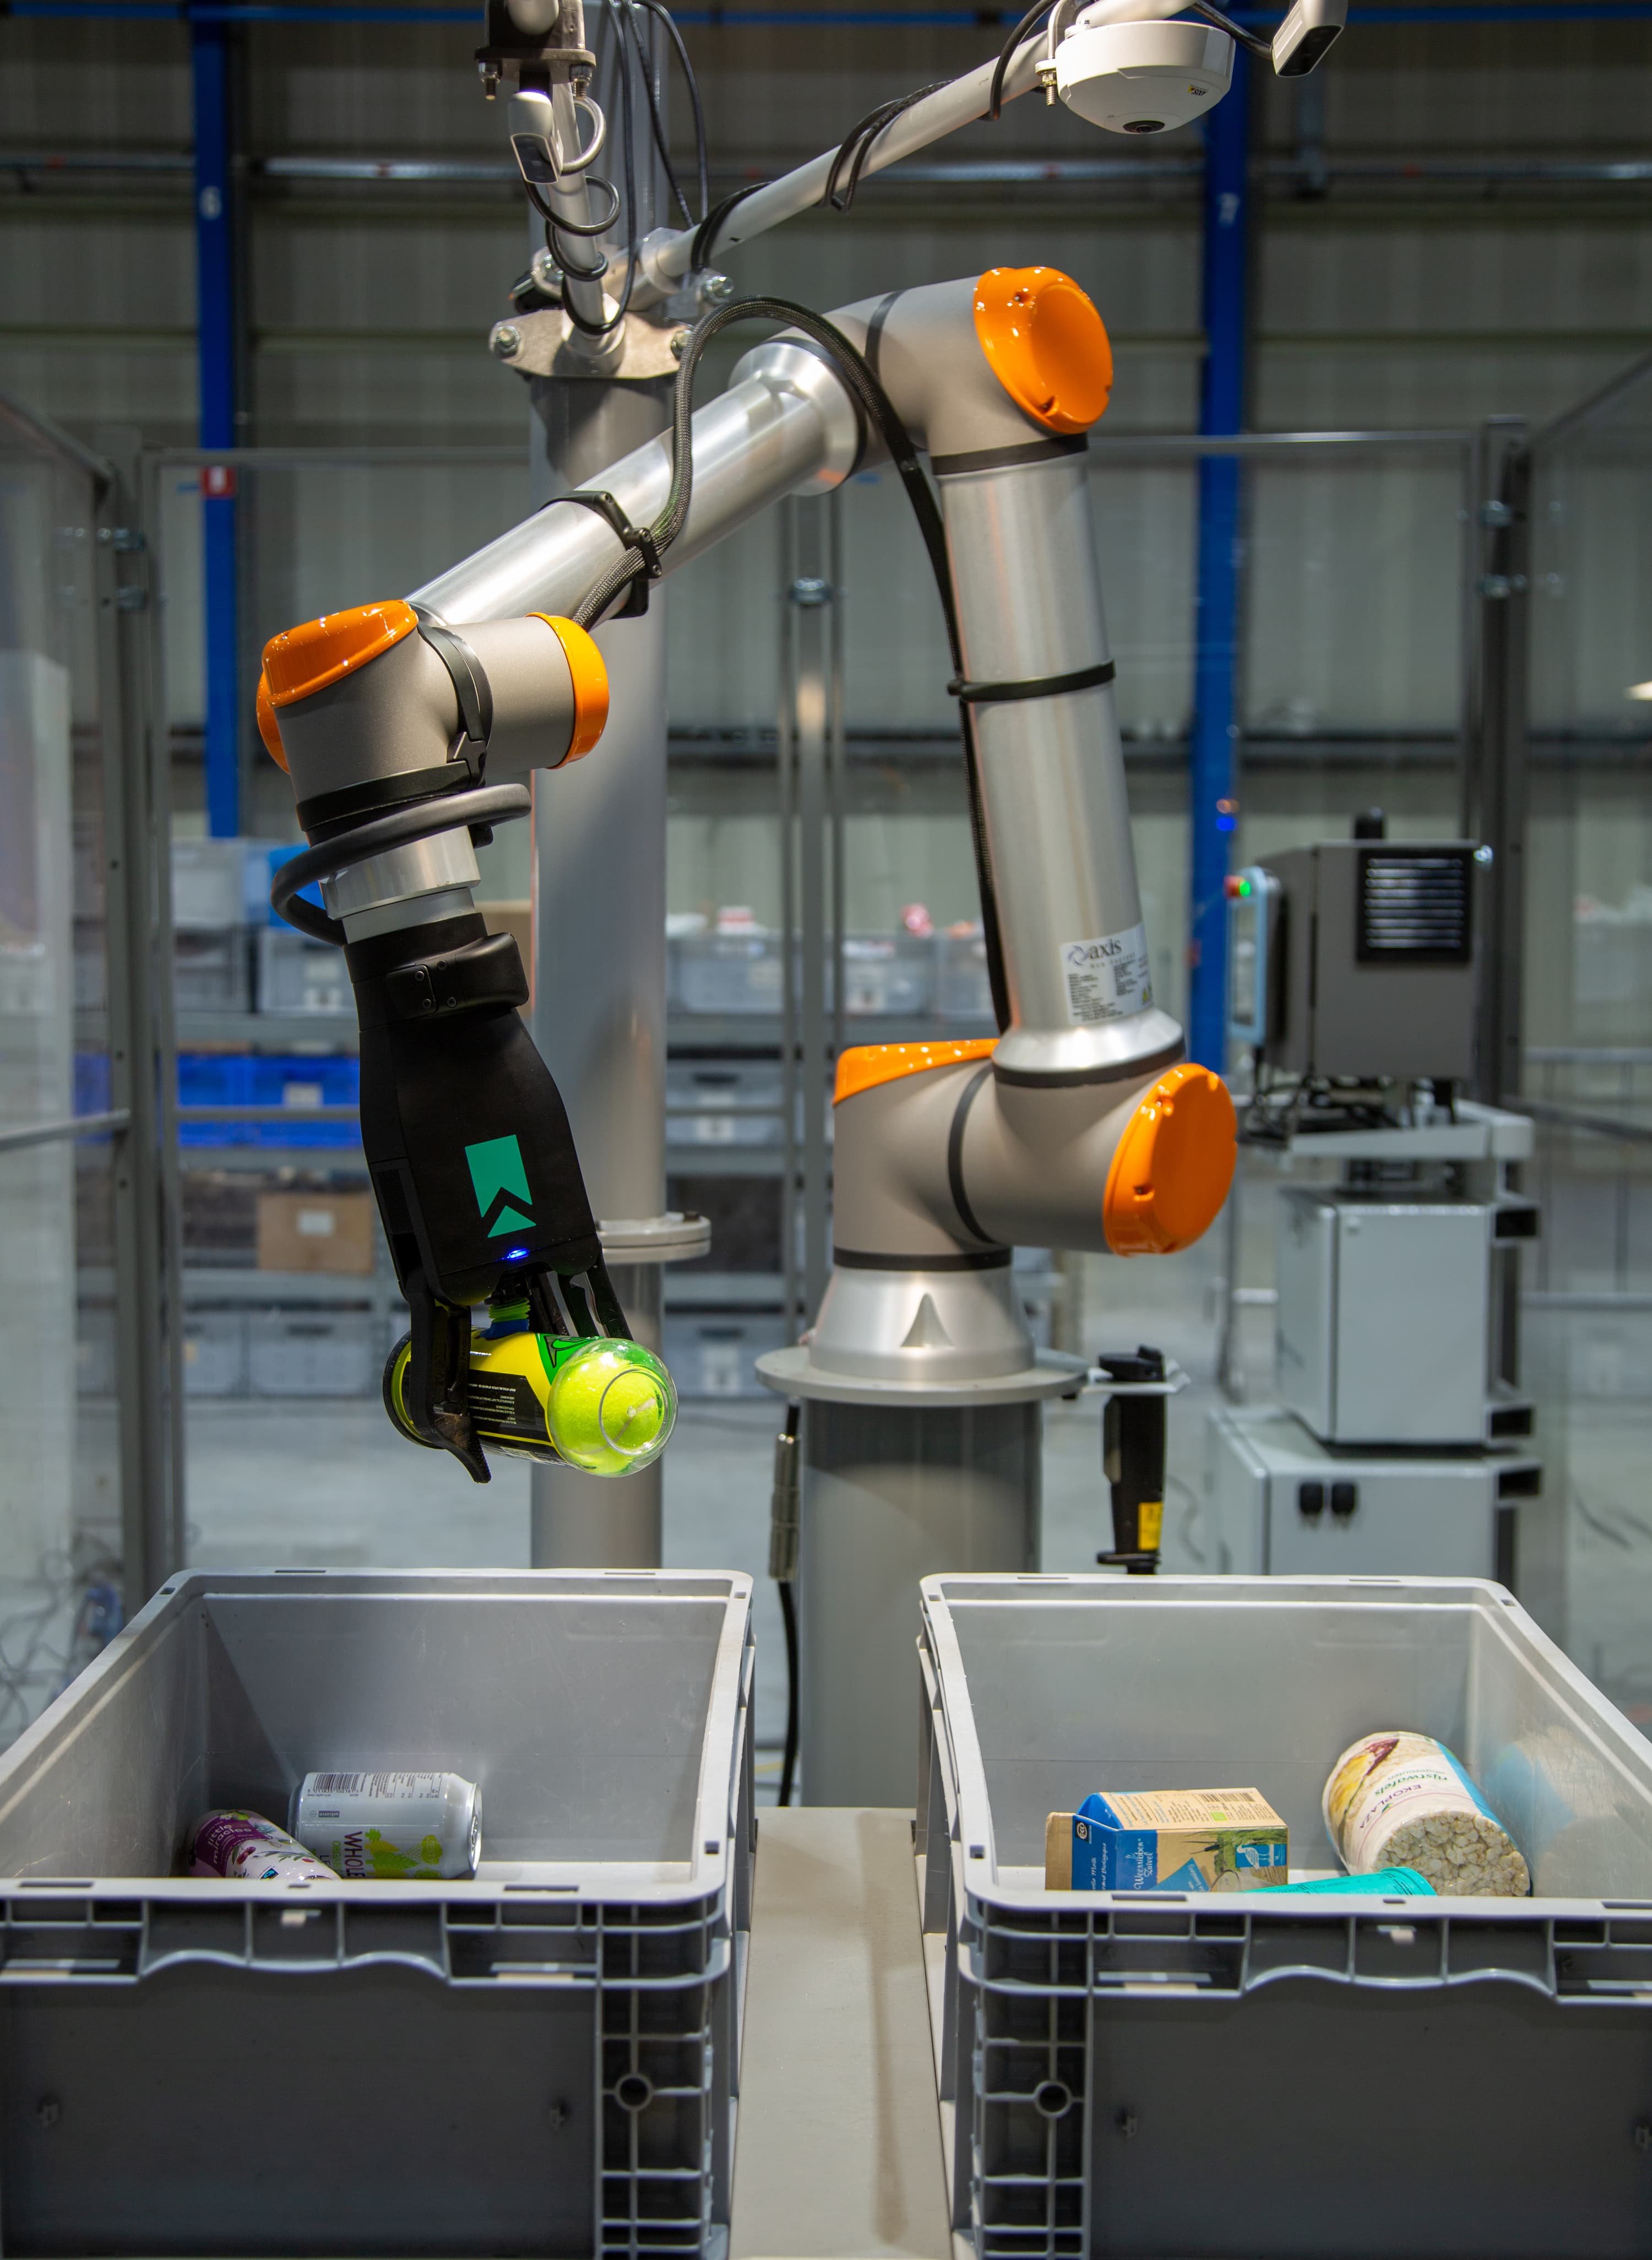 The Latest Article: Righthand robotics™ adds vanderlande to its growing partner integrator network